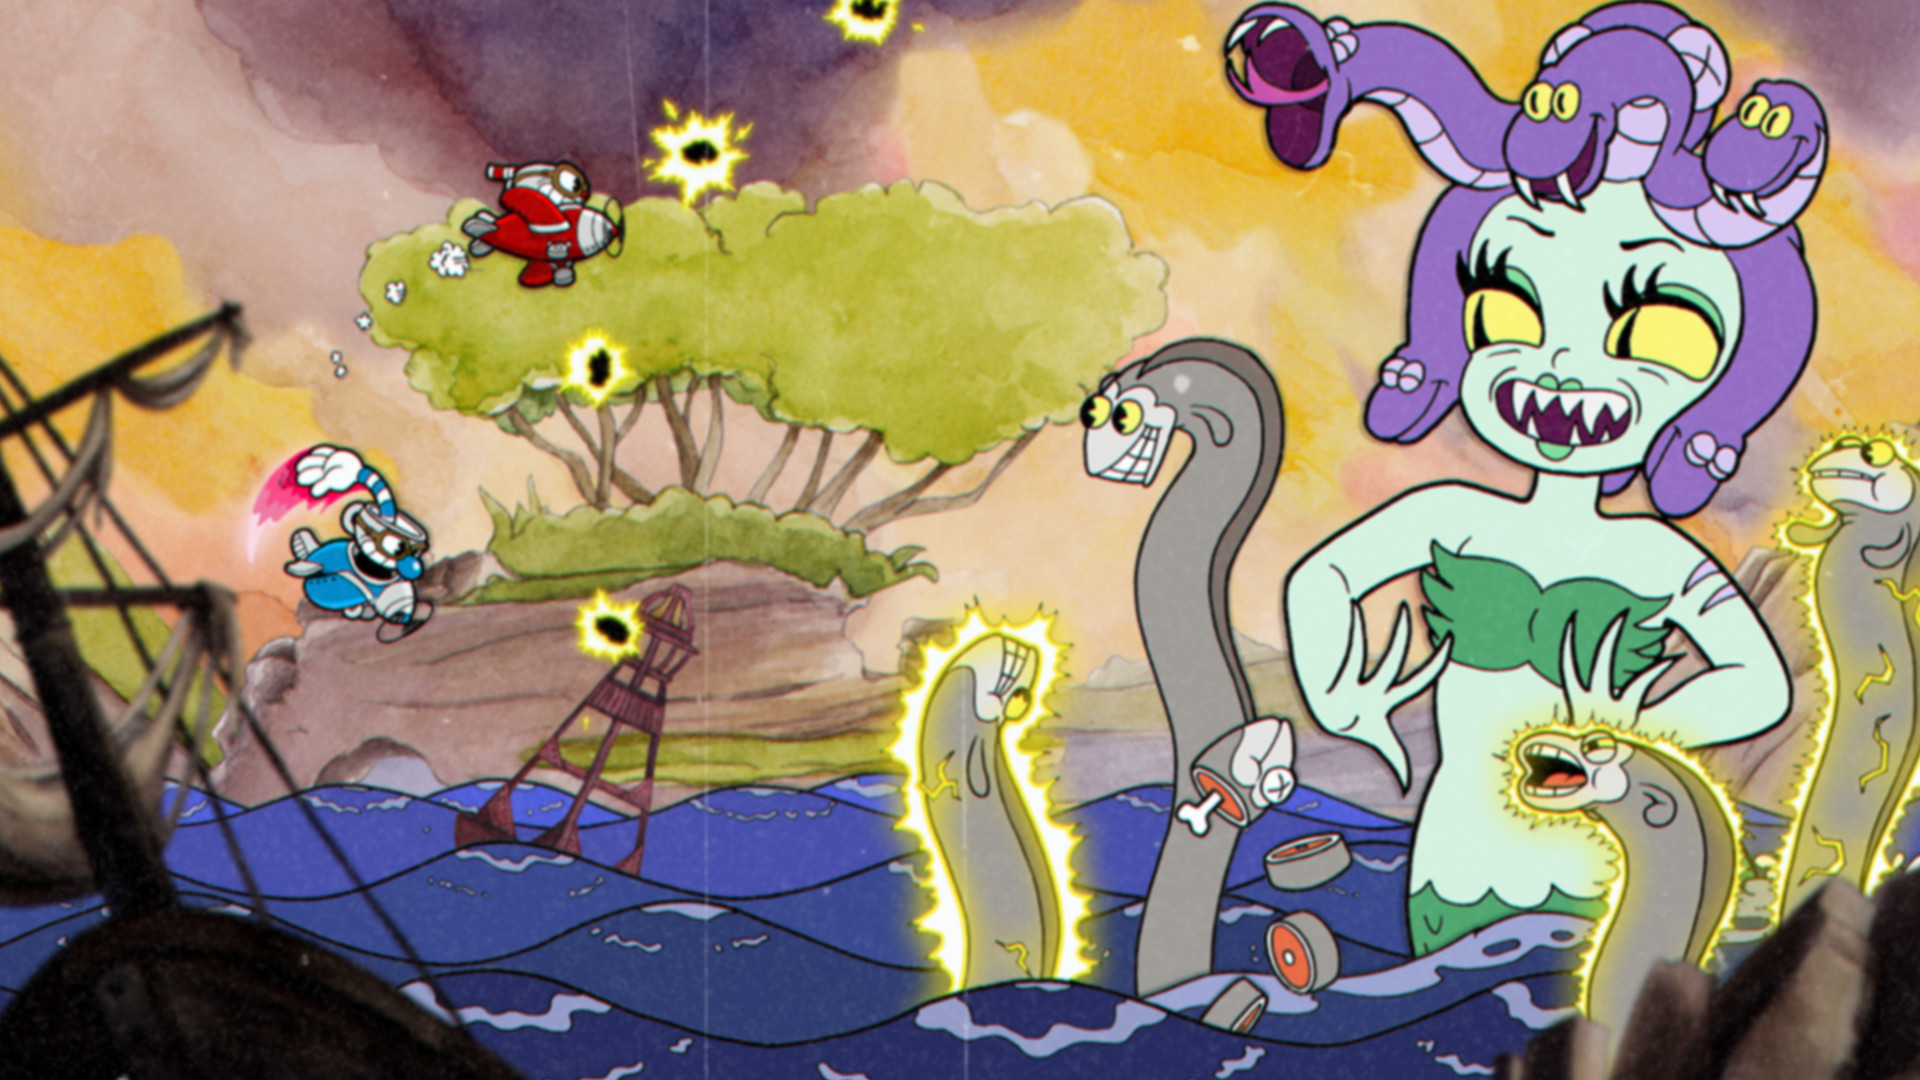 Cuphead Netflix show in production